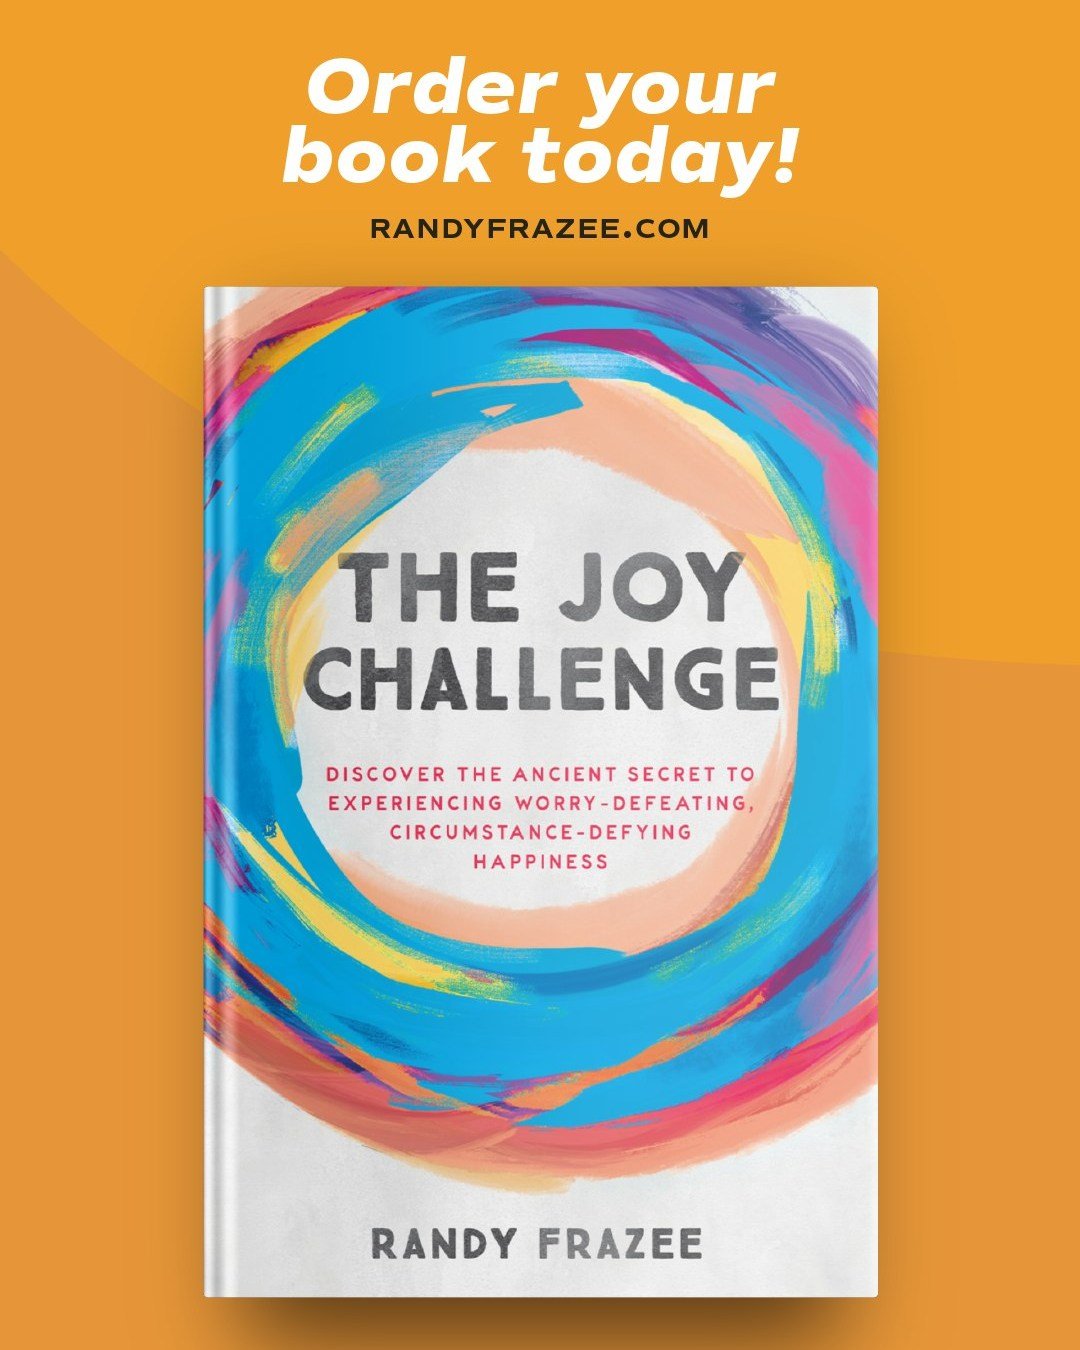 🎉 Pre-order your Joy Challenge book by May 9th
 
Pre-ordering the Joy Challenge book ensures you will receive your copy, guaranteeing access to this life-changing series. The Joy Challenge teaching series is a transformative experience designed to h